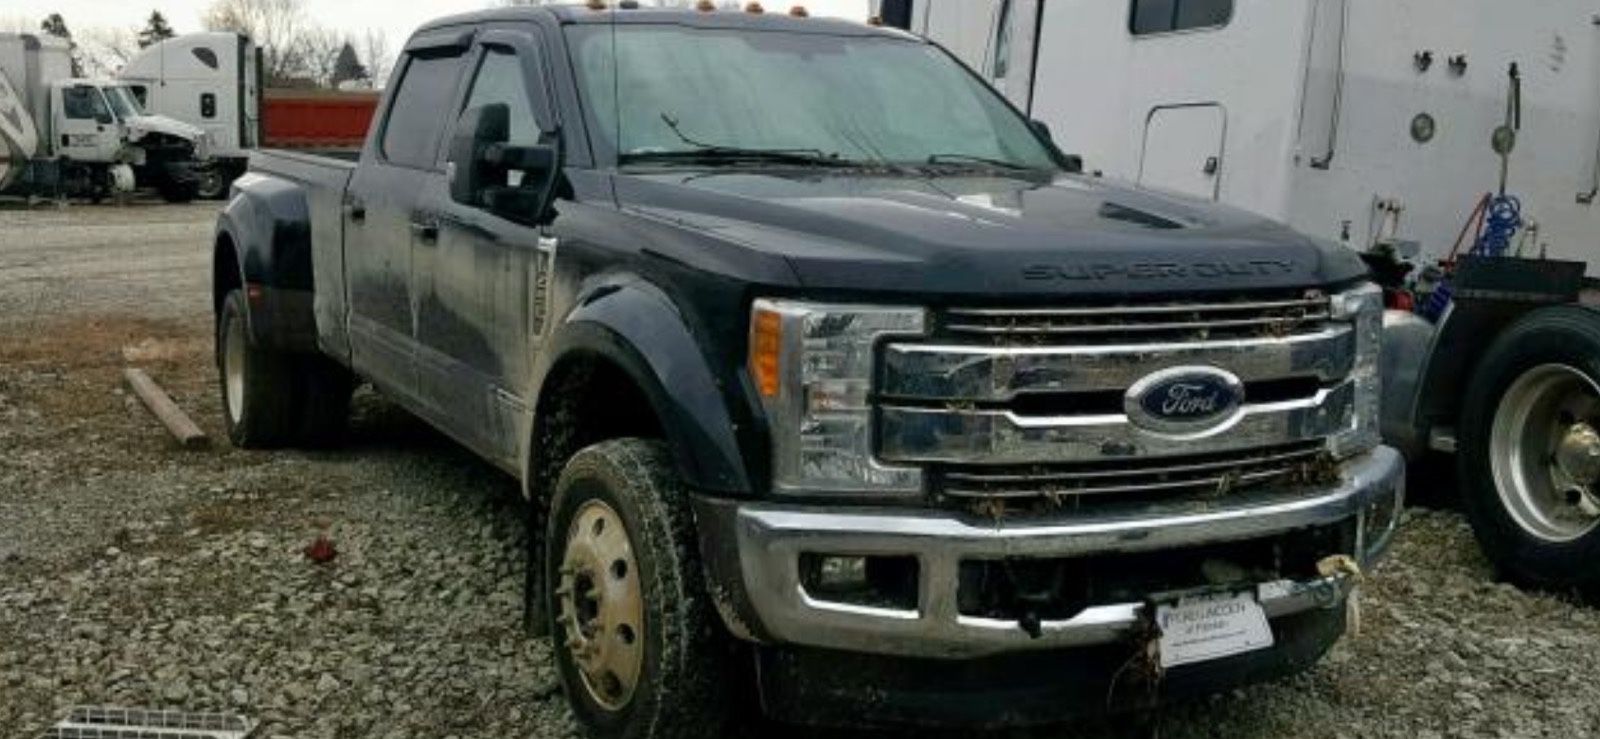 F-450 Part out